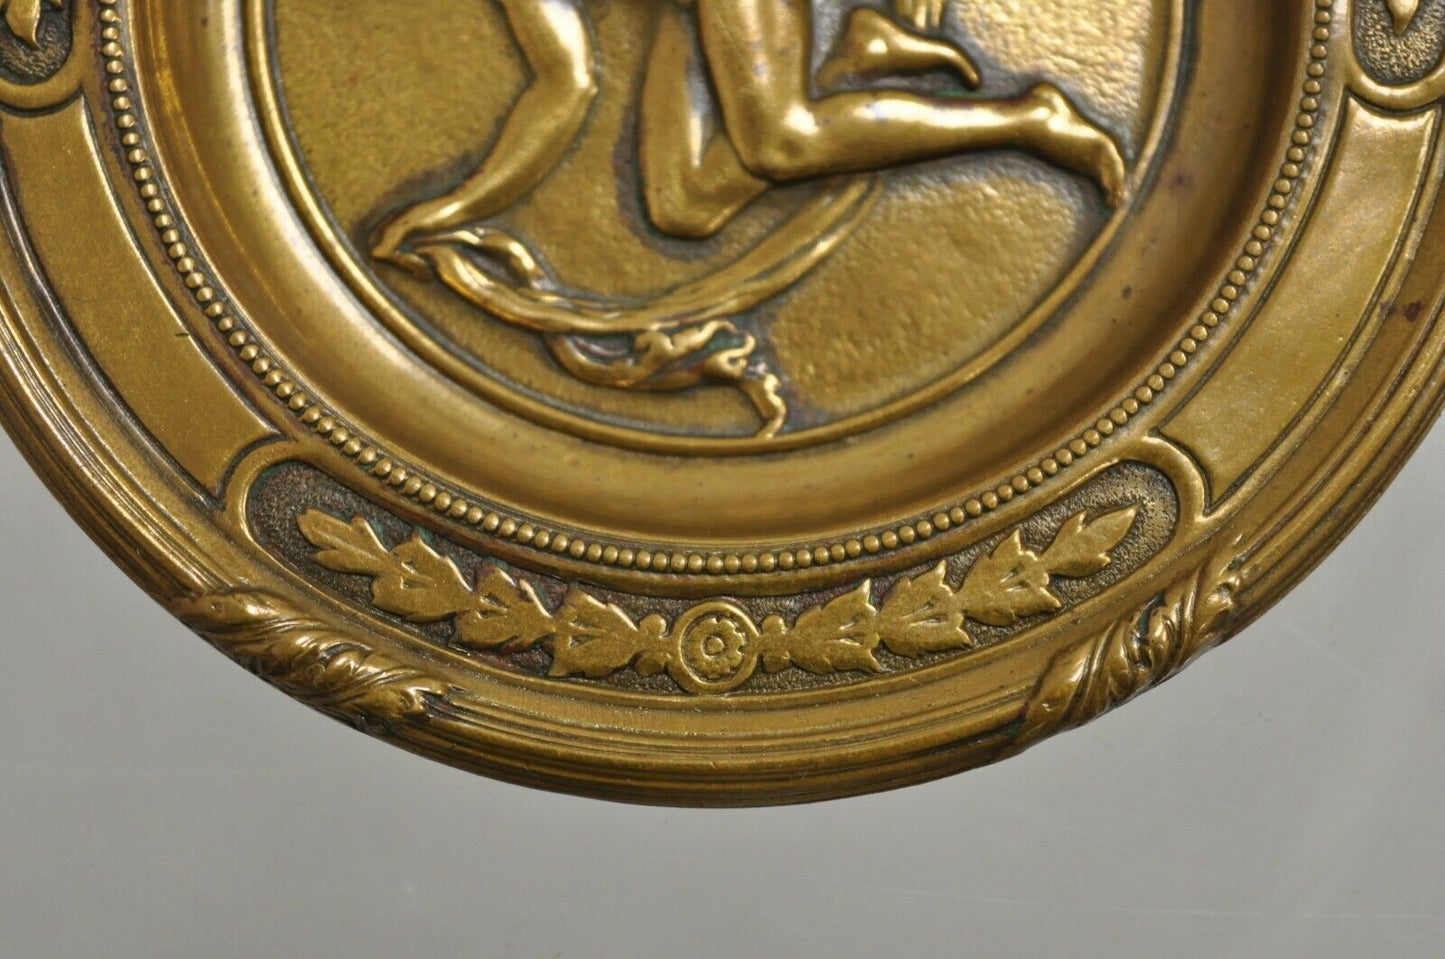 Antique 5" Bronze Neoclassical Art Nouveau Round Dish with Nude Female Maiden